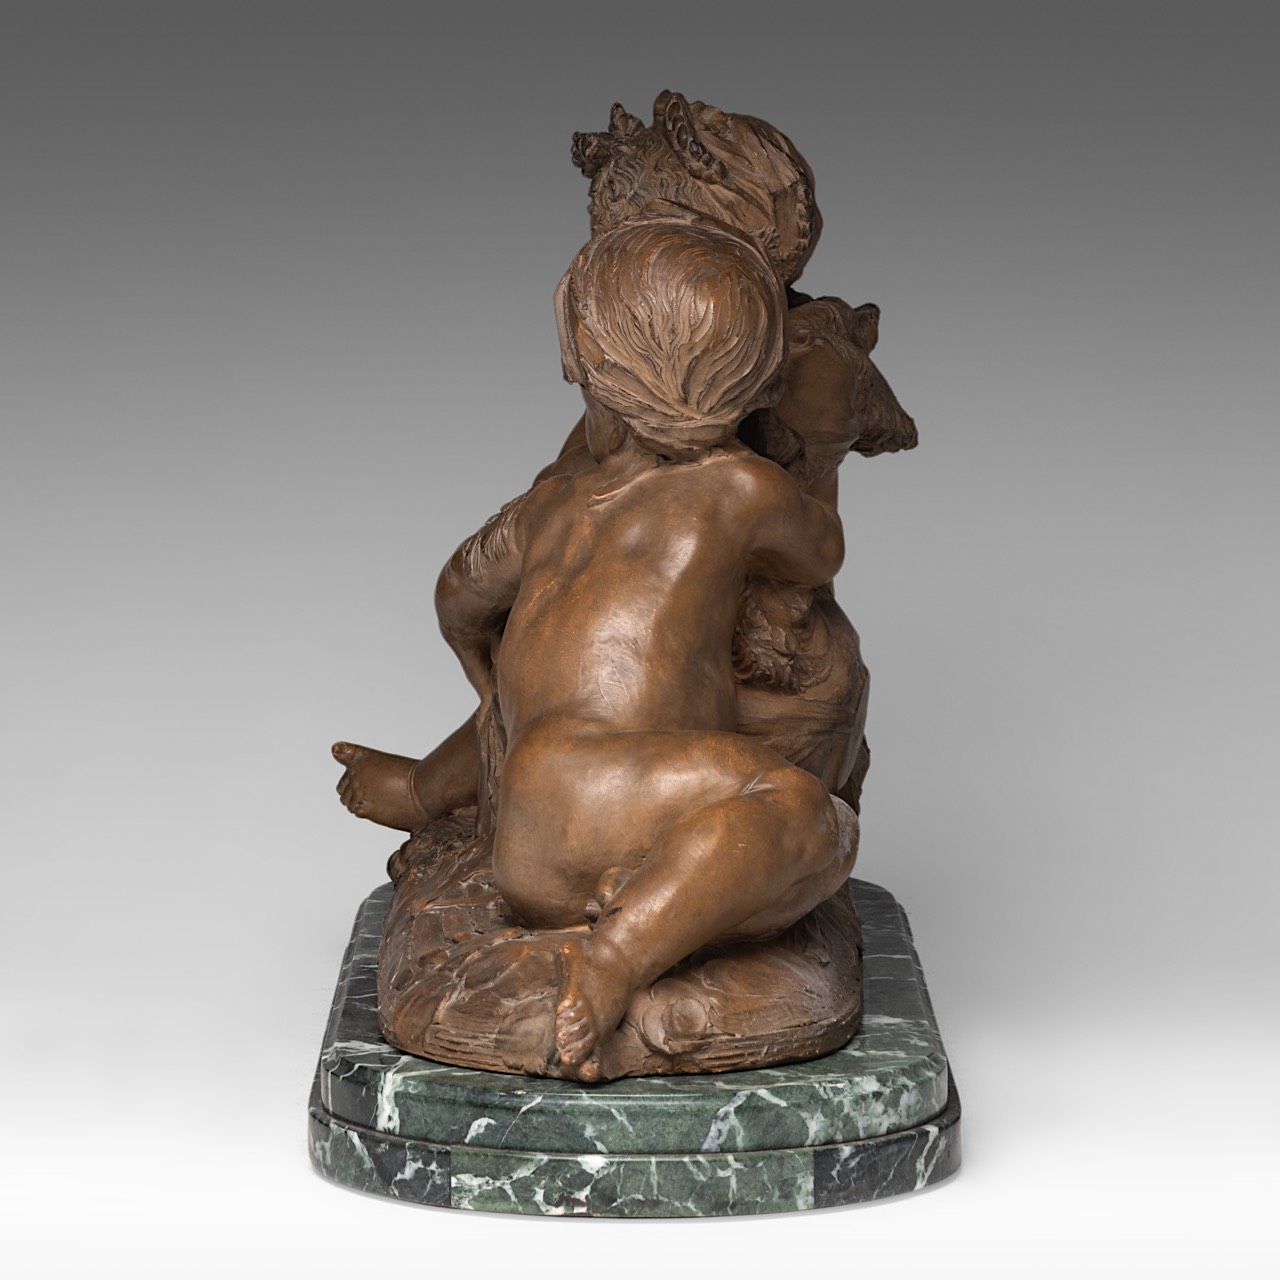 Carrier-Belleuse (1824-1887), two putti by the fountain, terracotta on a marble base, H 43 - W 68 cm - Image 3 of 10